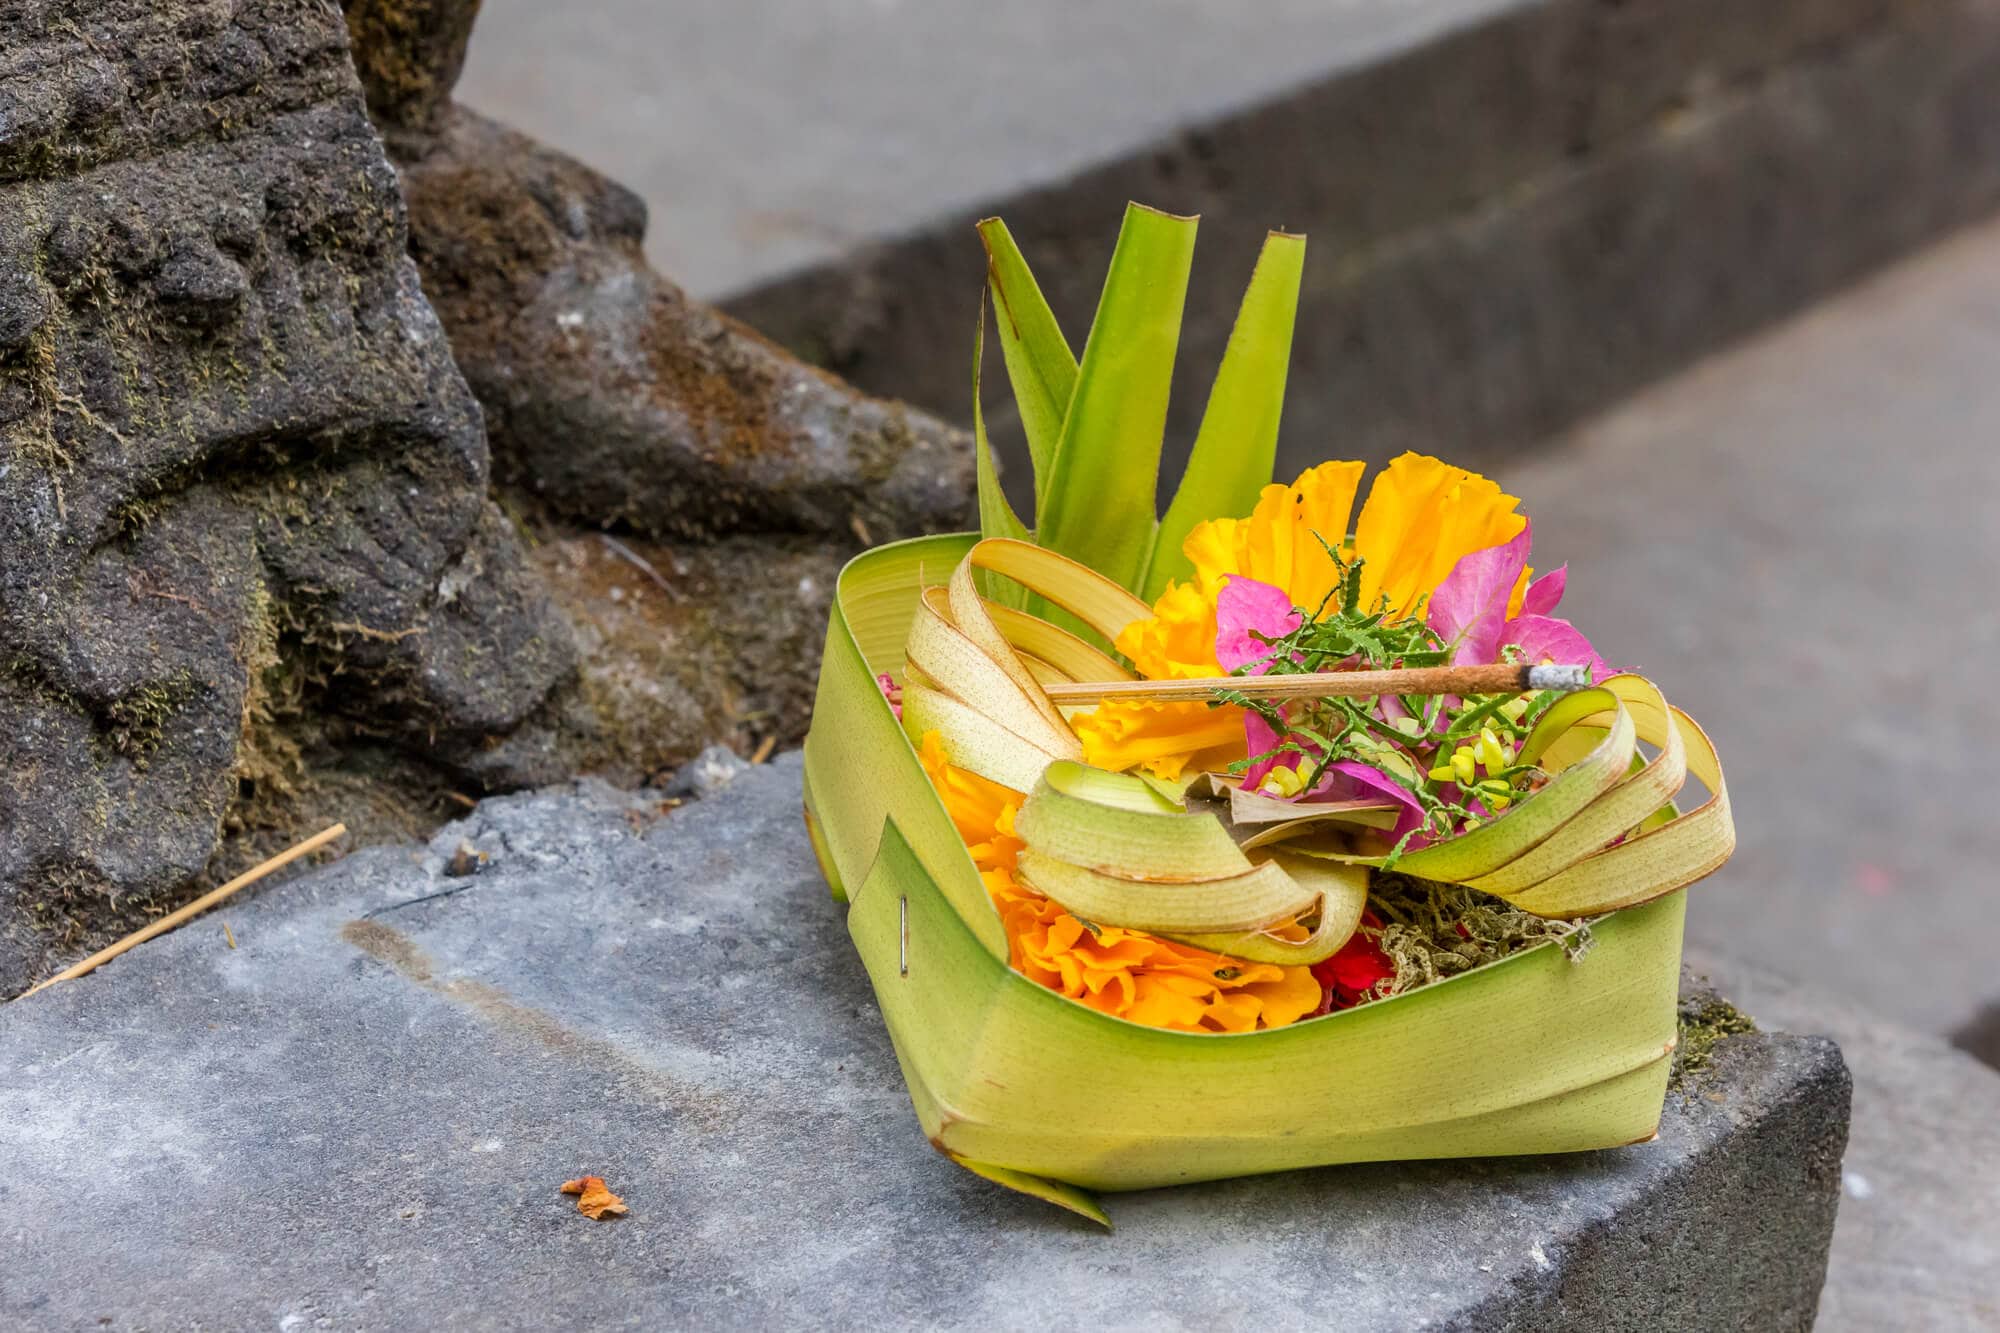 A beautiful light green canang sari offering in Bali, with pink and yellow flowers and an incense stick. You will se many of these during your two weeks in Bali. Please do not step on or disturb the offerings in Bali